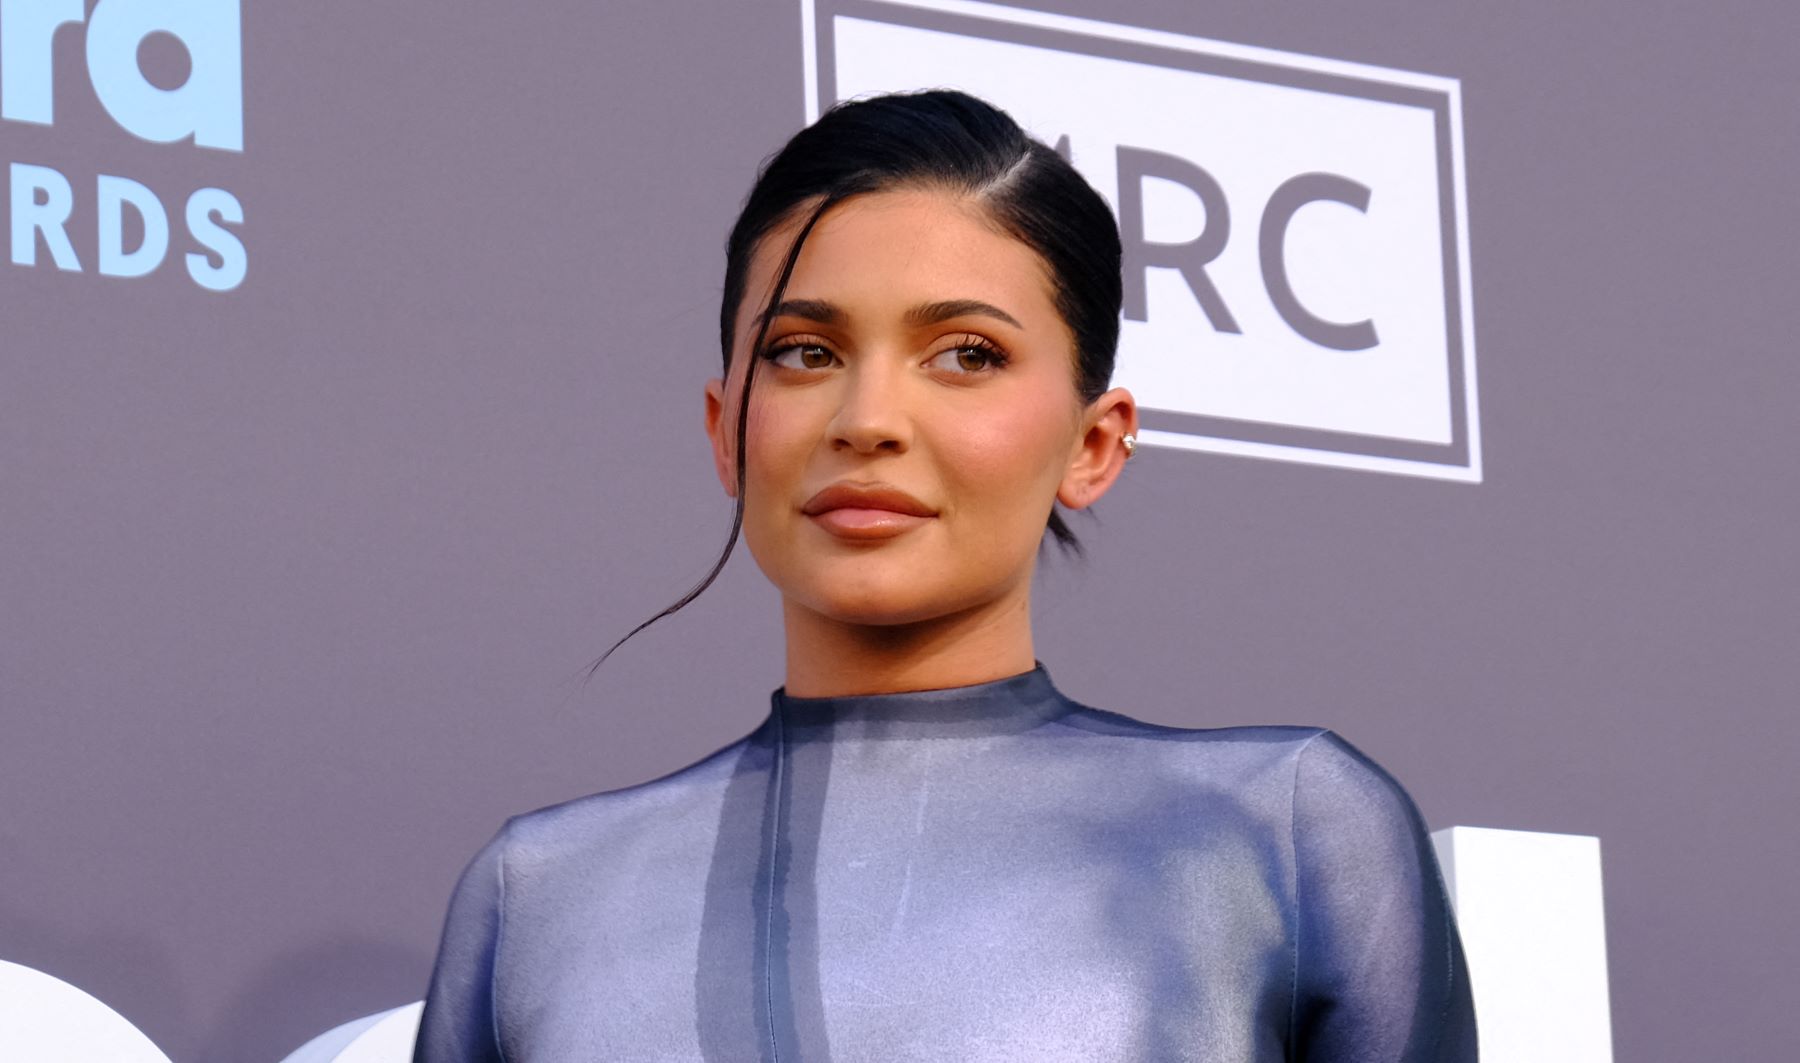 Kylie Jenner at the 2022 Billboard Music Awards at the MGM Grand Garden Arena in Las Vegas, Nevada